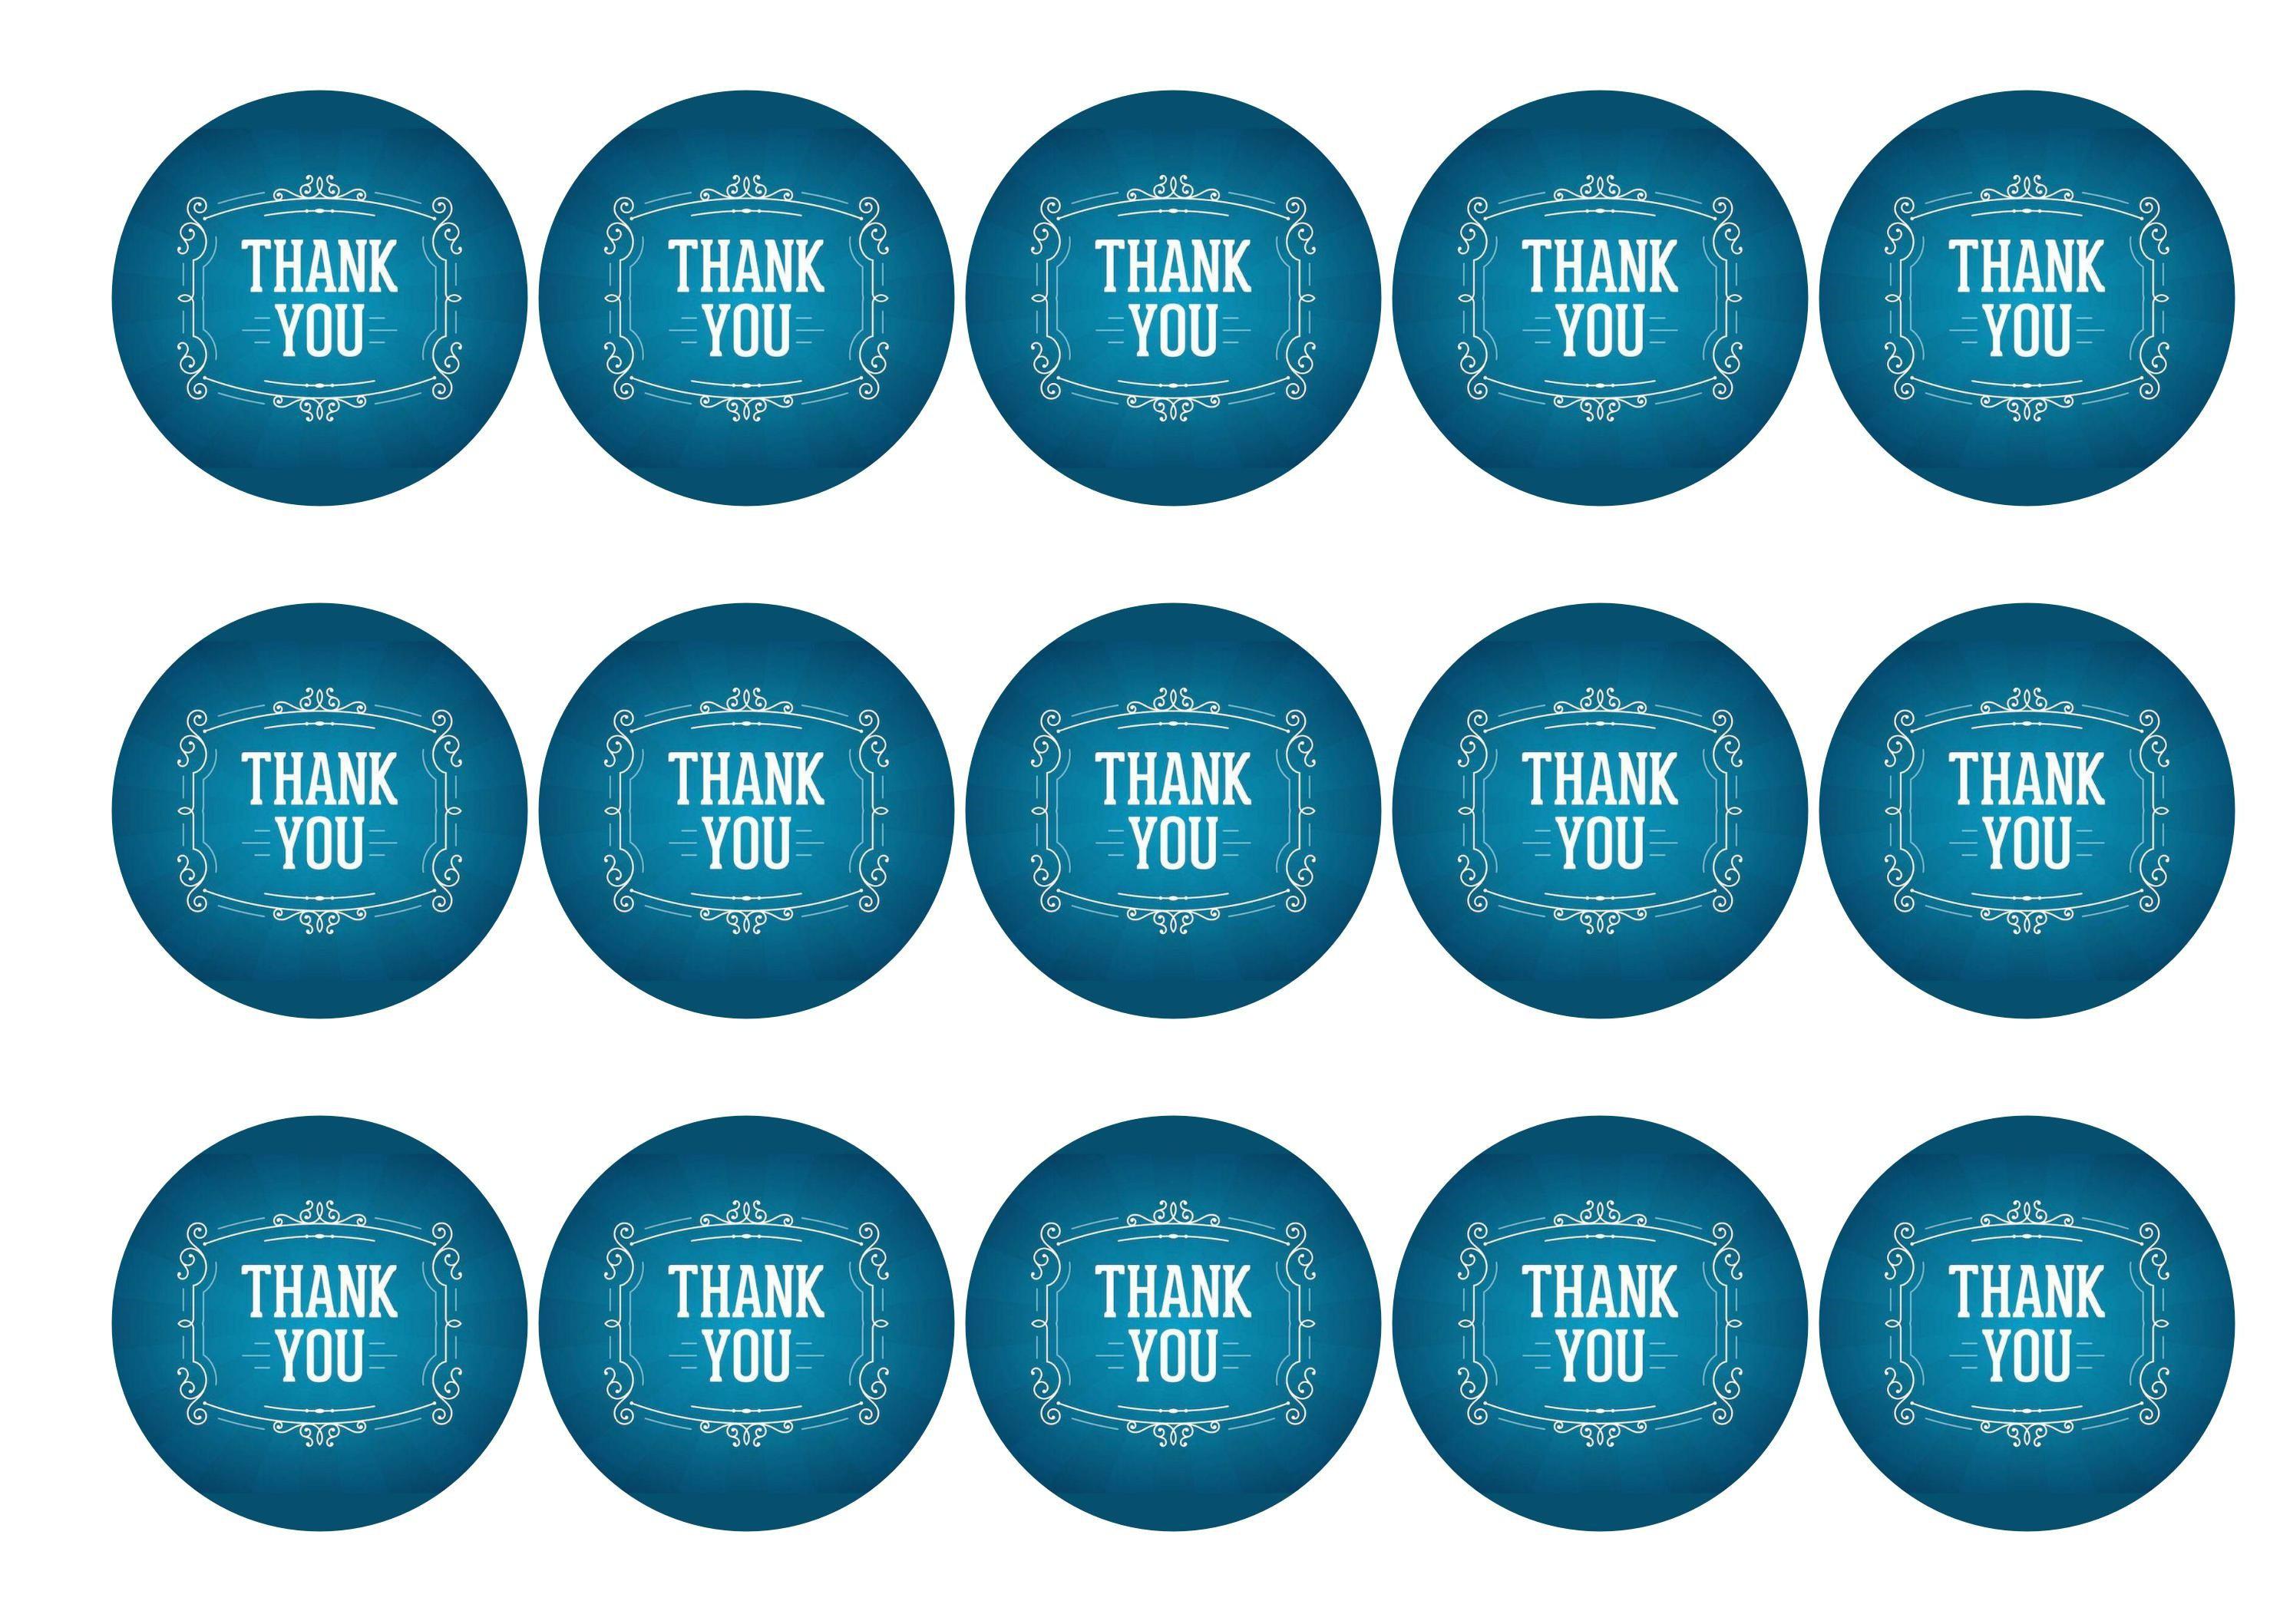 Printed edible cupcake toppers - thank you in blue